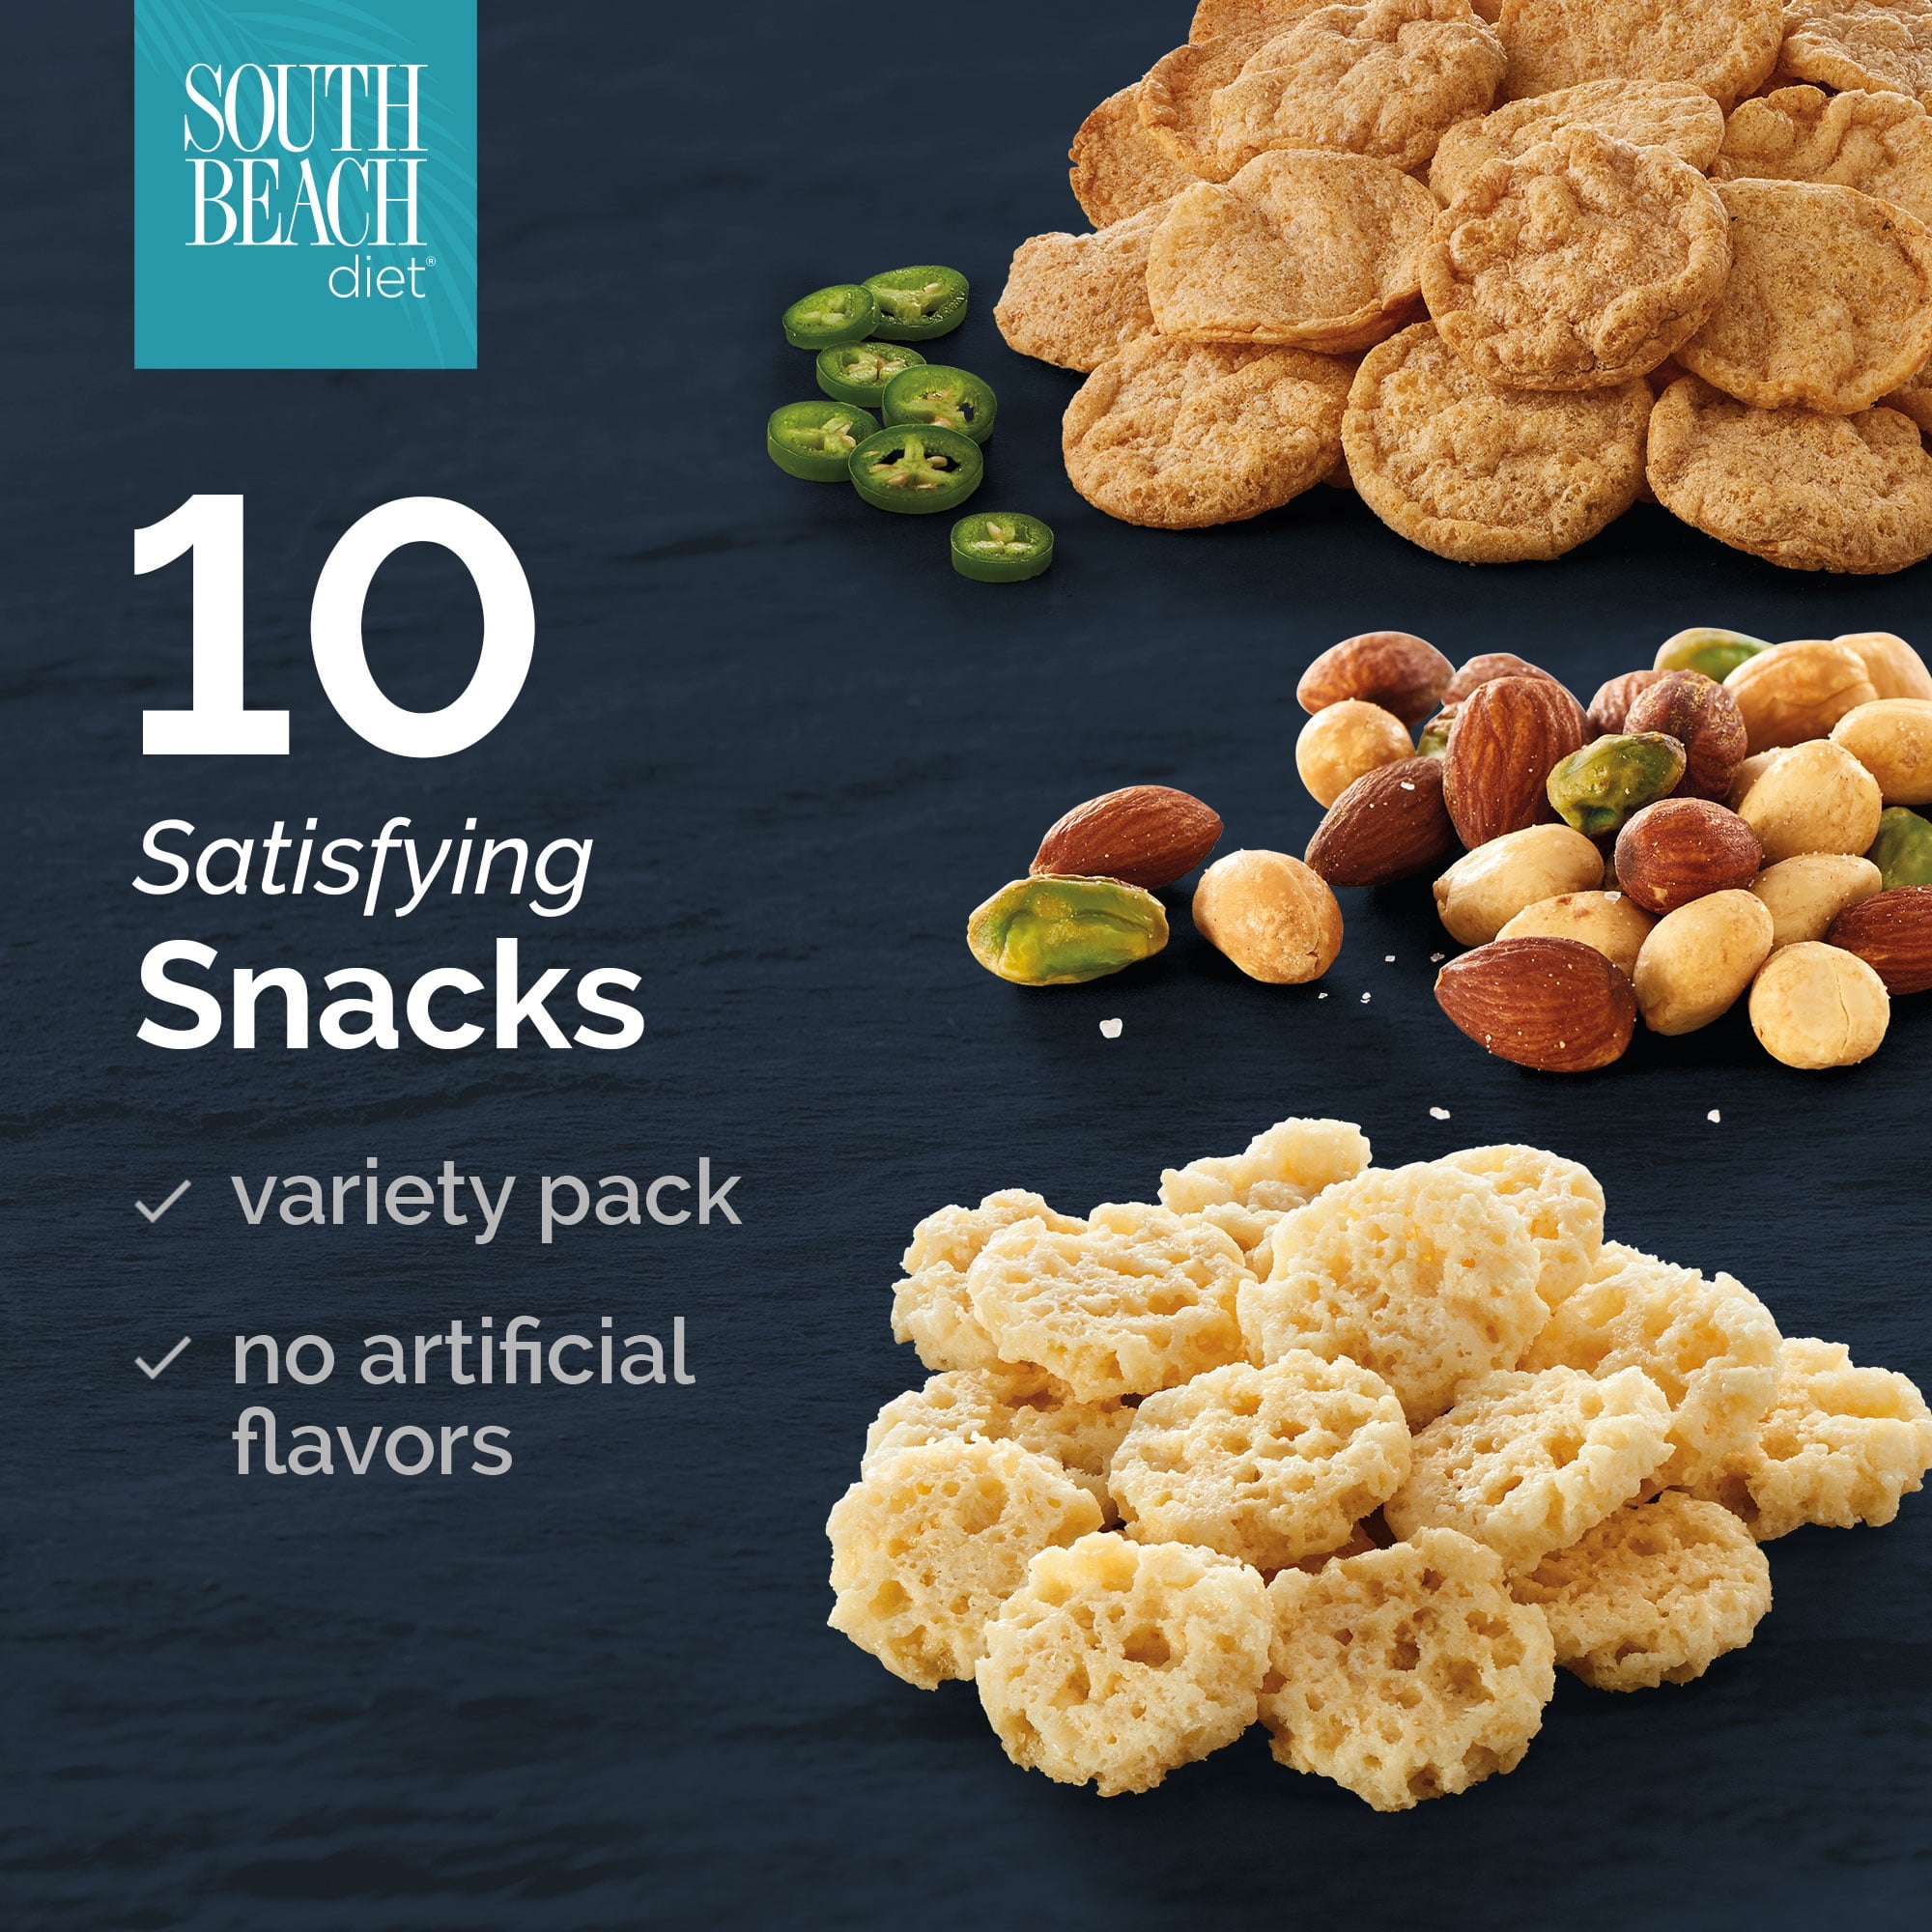 who sells south beach diet snacks